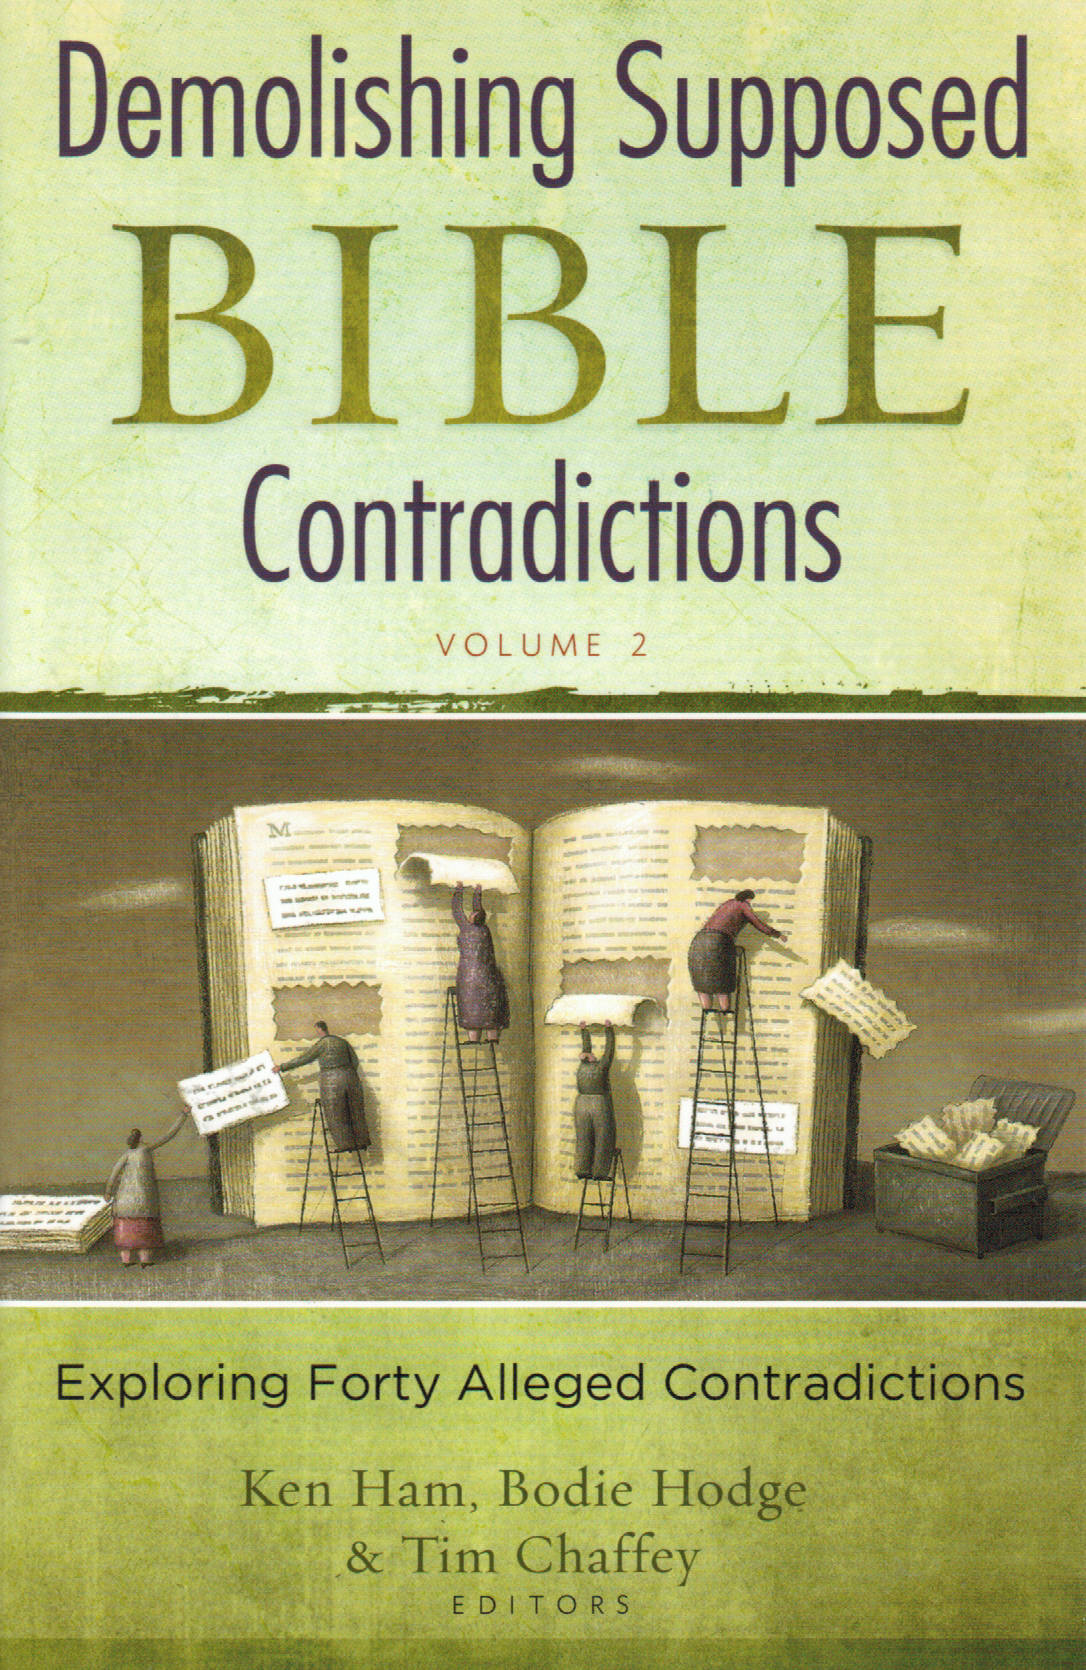 Demolishing Supposed Bible Contradictions: Exploring Forty Alleged Contradictions Volume 2